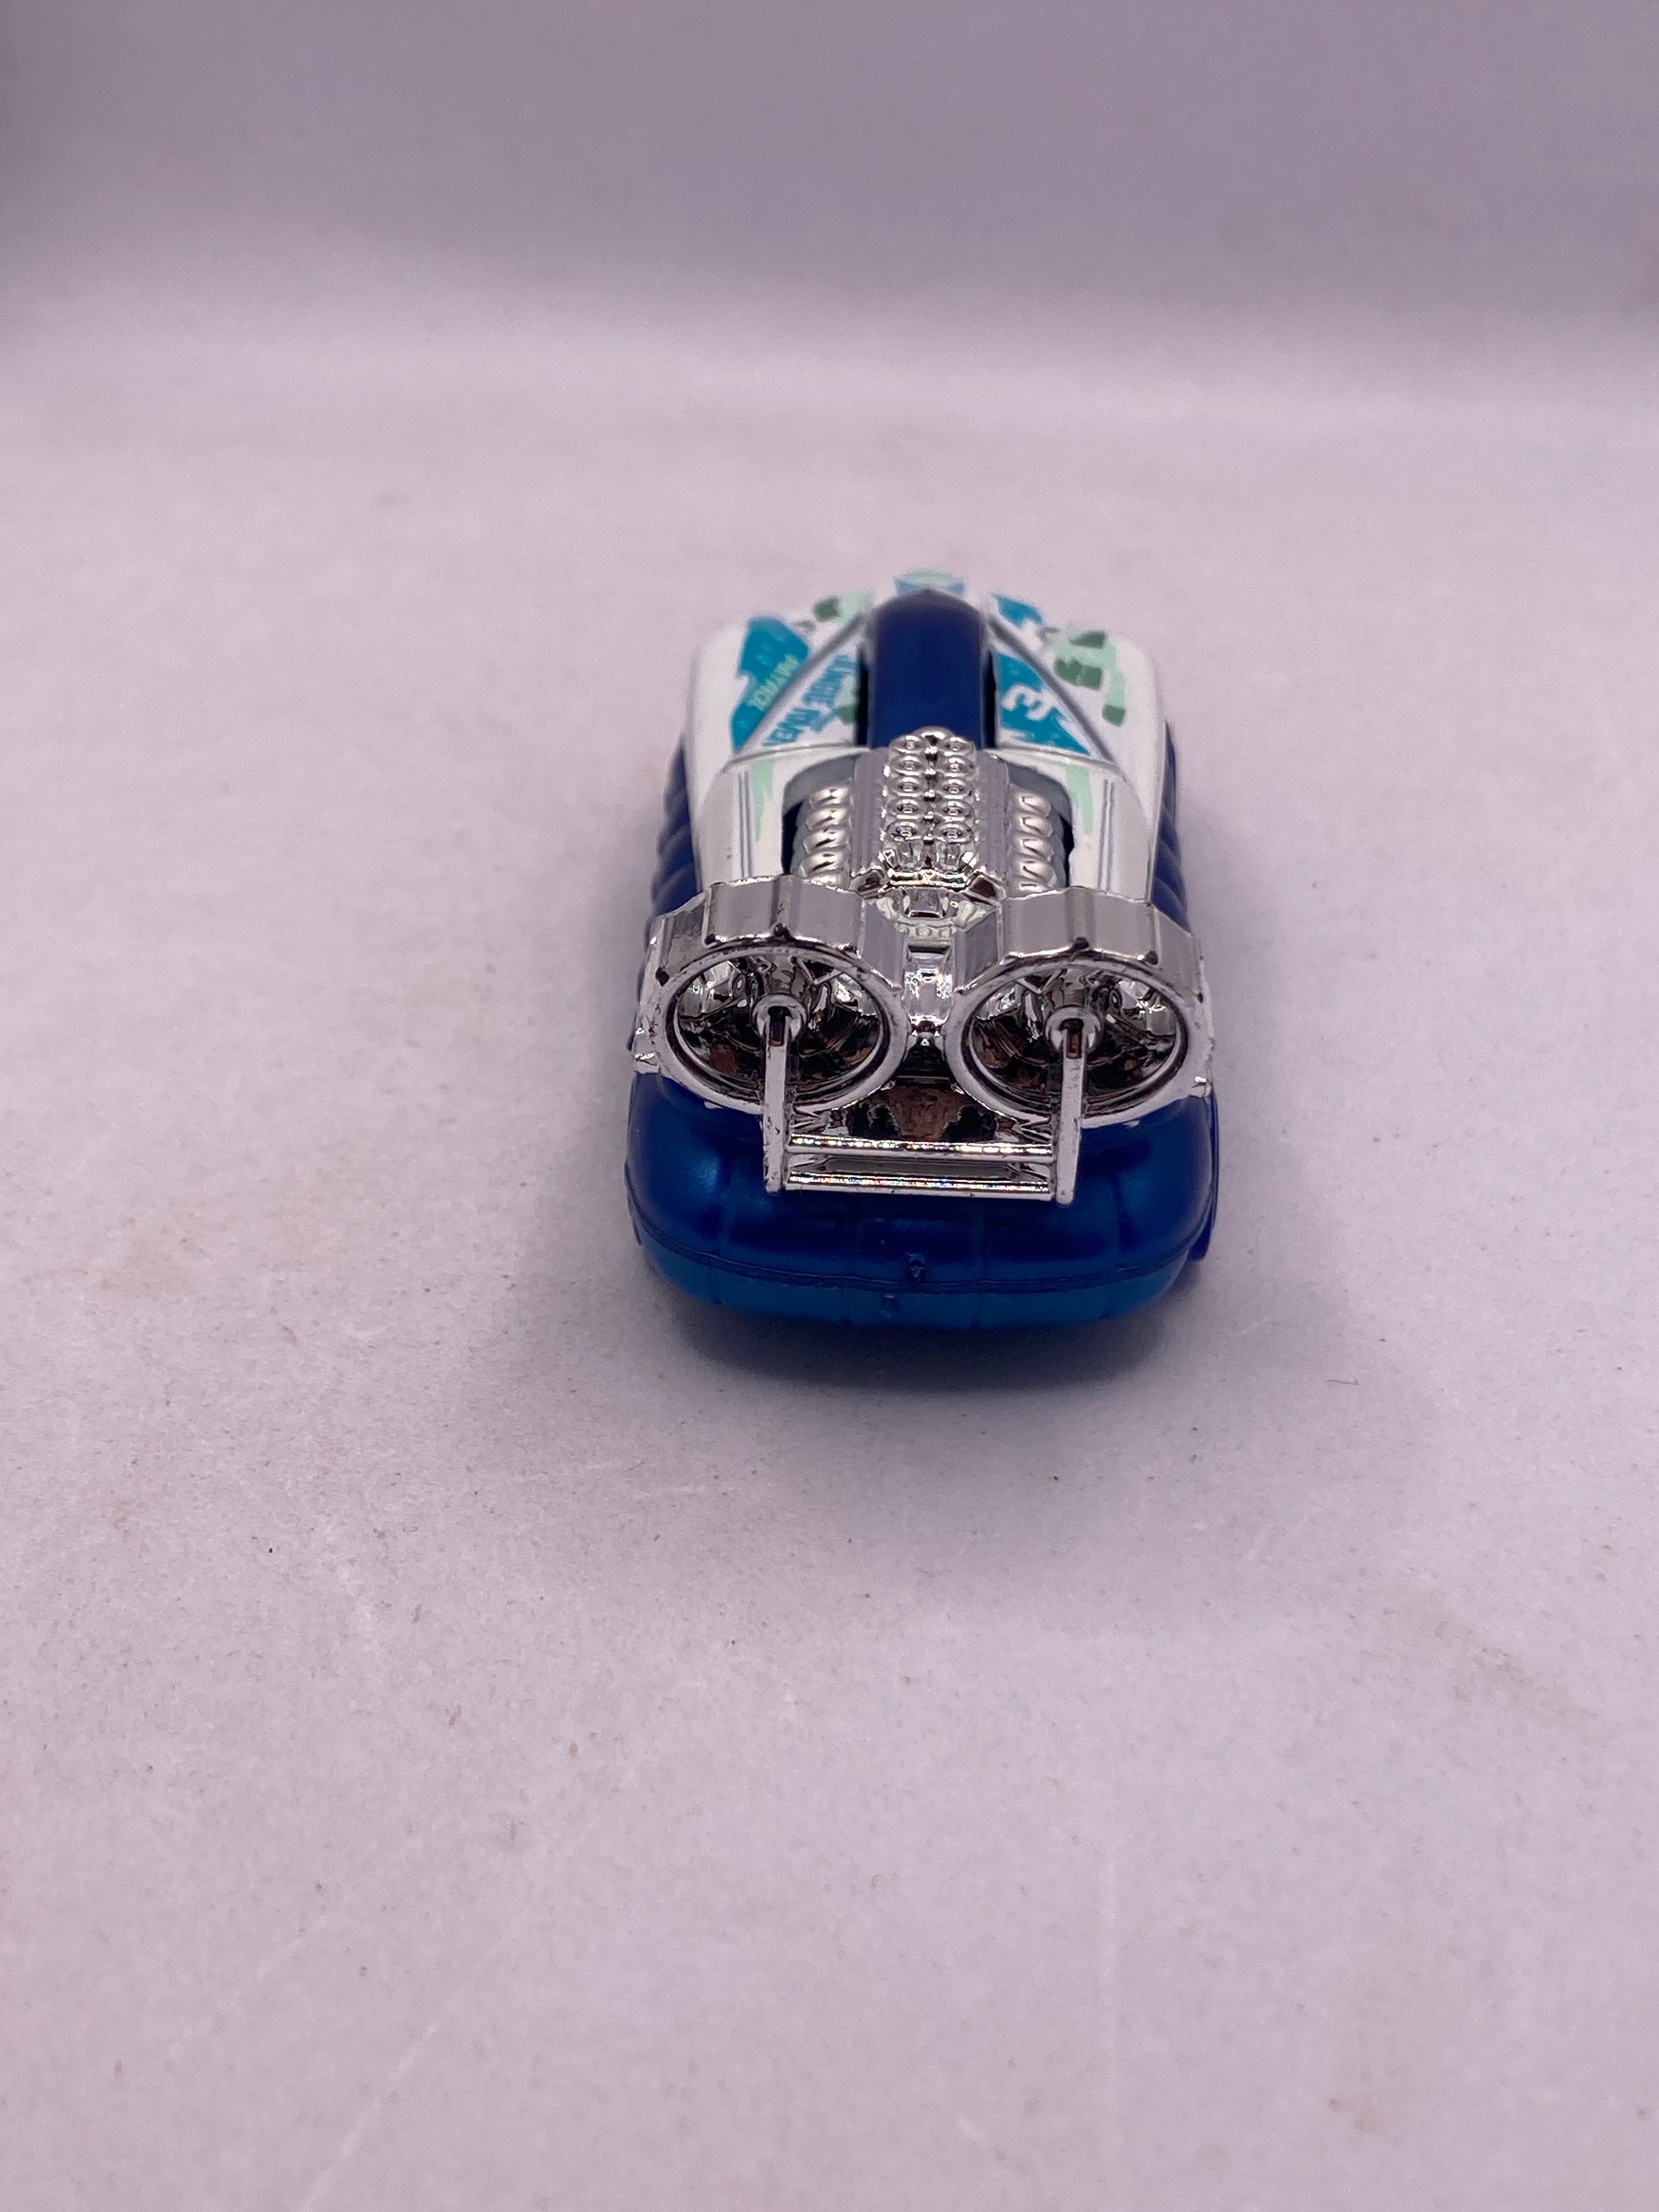 Hot Wheels Hover Storm Diecast